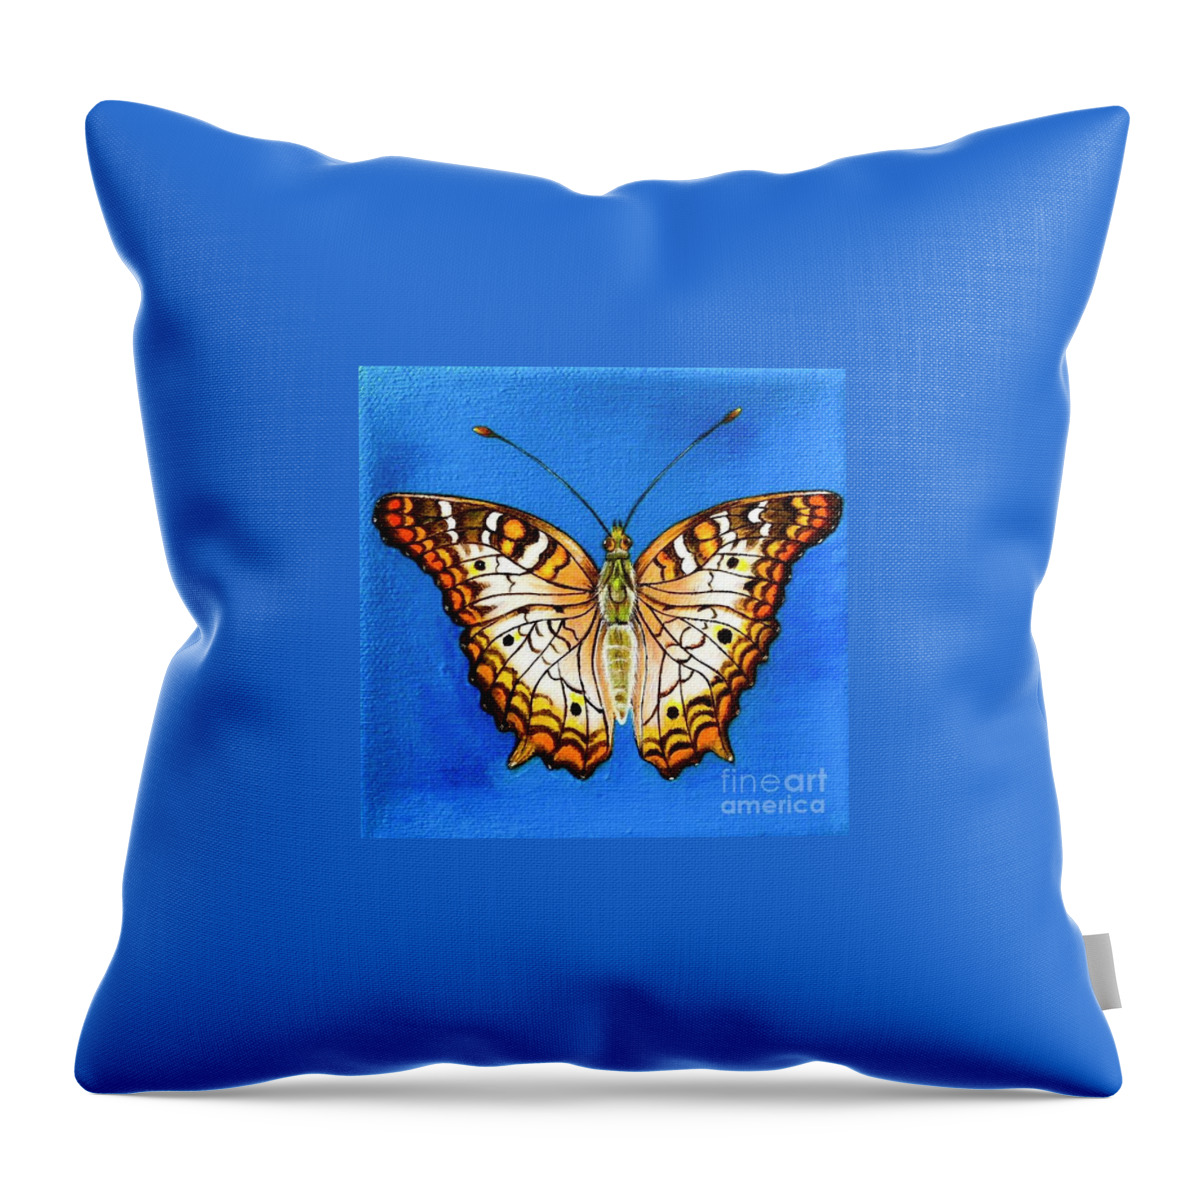 Painting Throw Pillow featuring the painting Peace by Sudakshina Bhattacharya